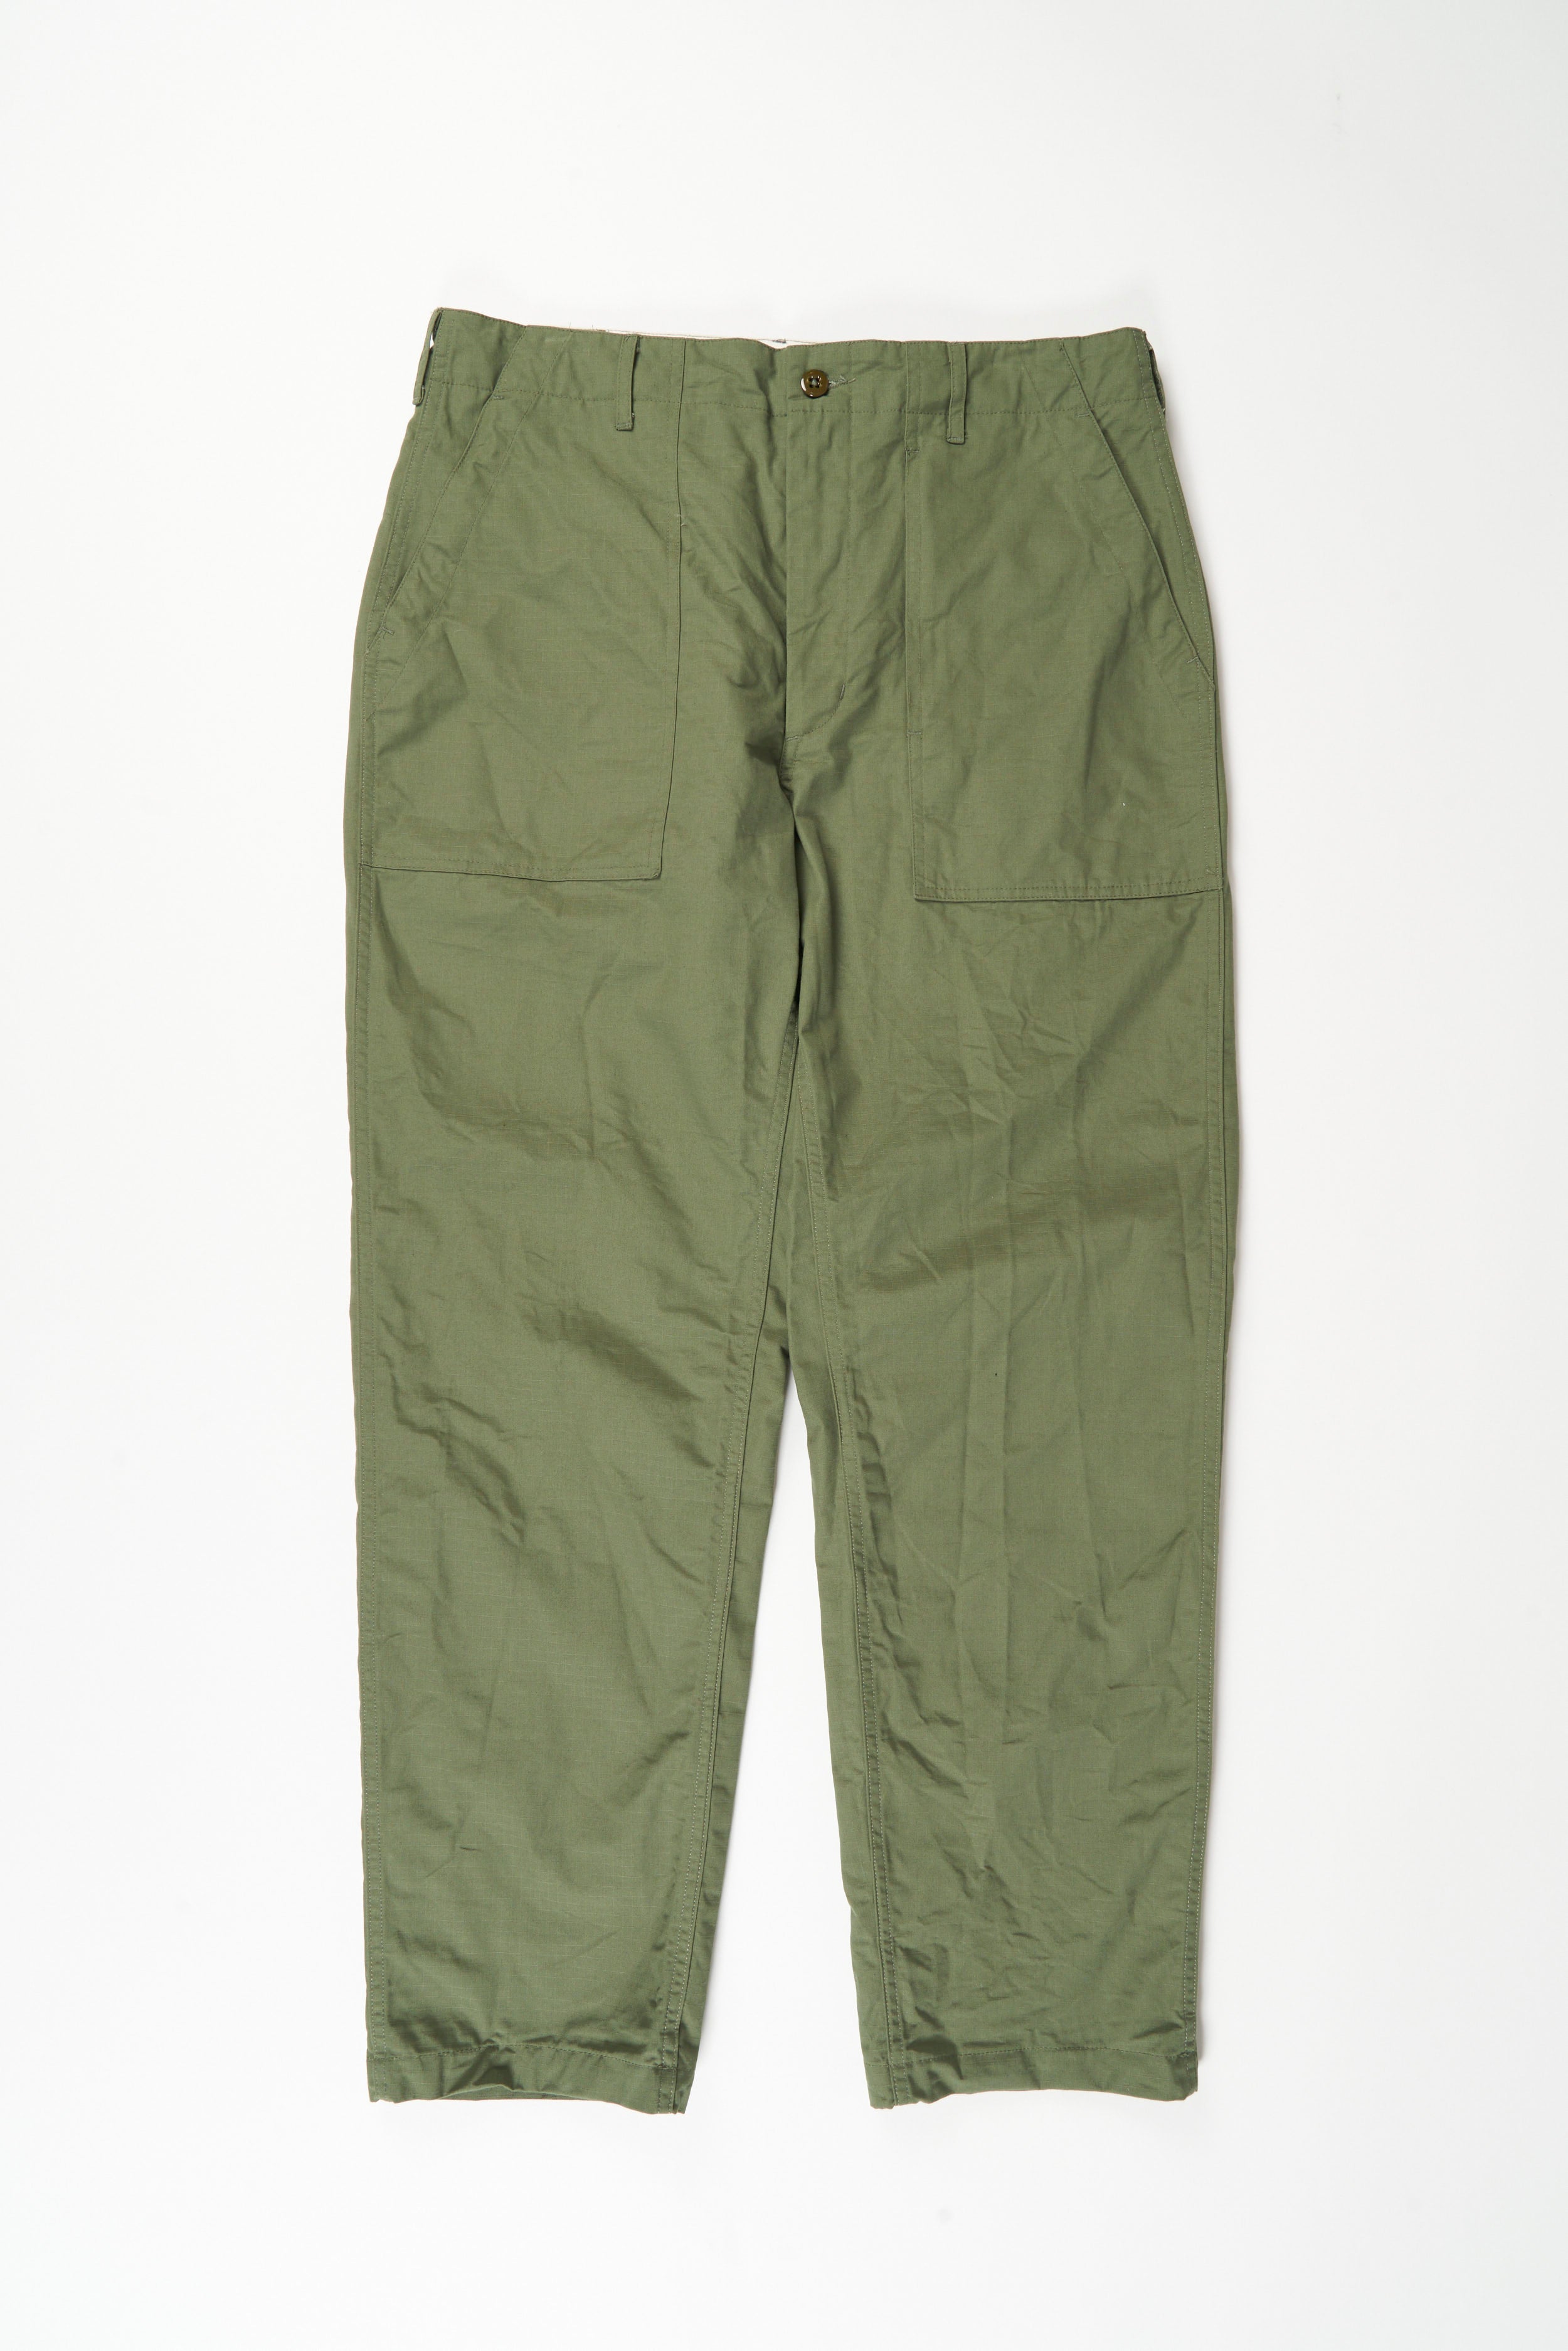 Fatigue Pant - Olive Cotton Ripstop